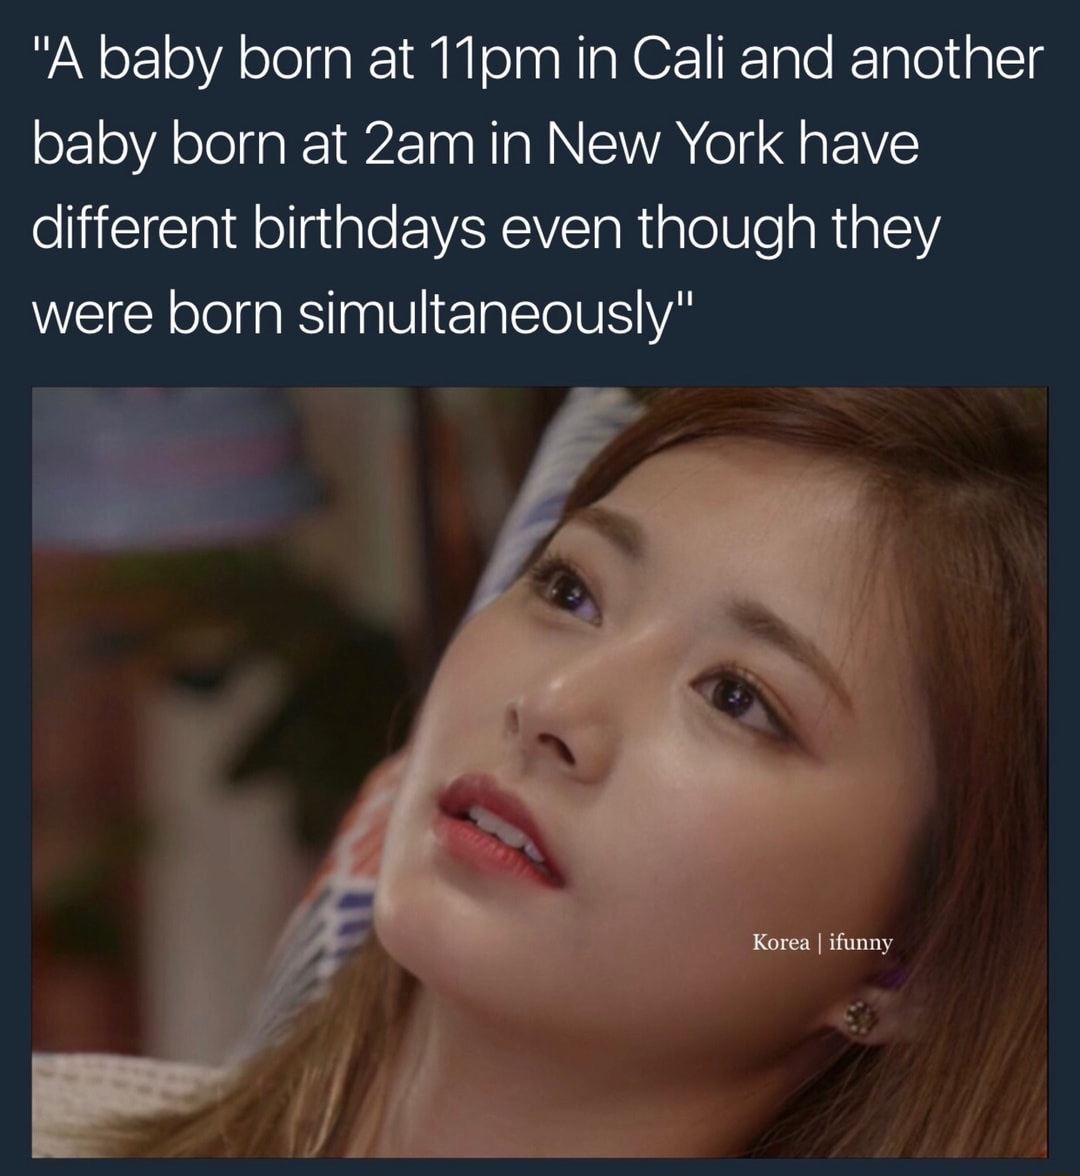 dank meme photo caption - "A baby born at 11pm in Cali and another baby born at 2am in New York have different birthdays even though they were born simultaneously" Korea | ifunny